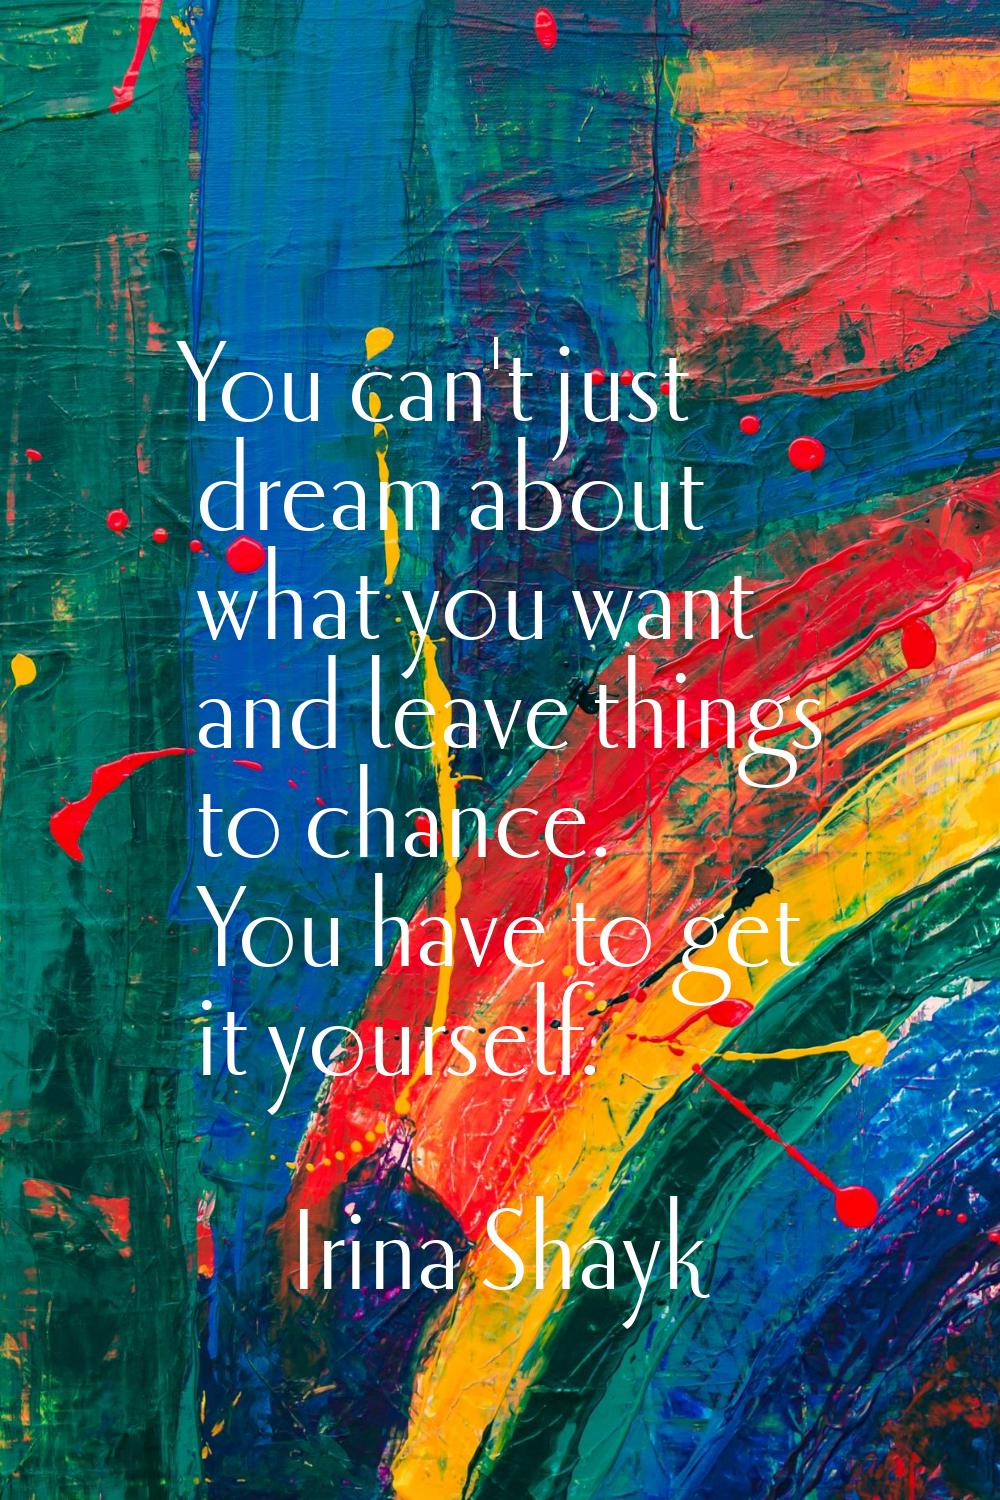 You can't just dream about what you want and leave things to chance. You have to get it yourself.